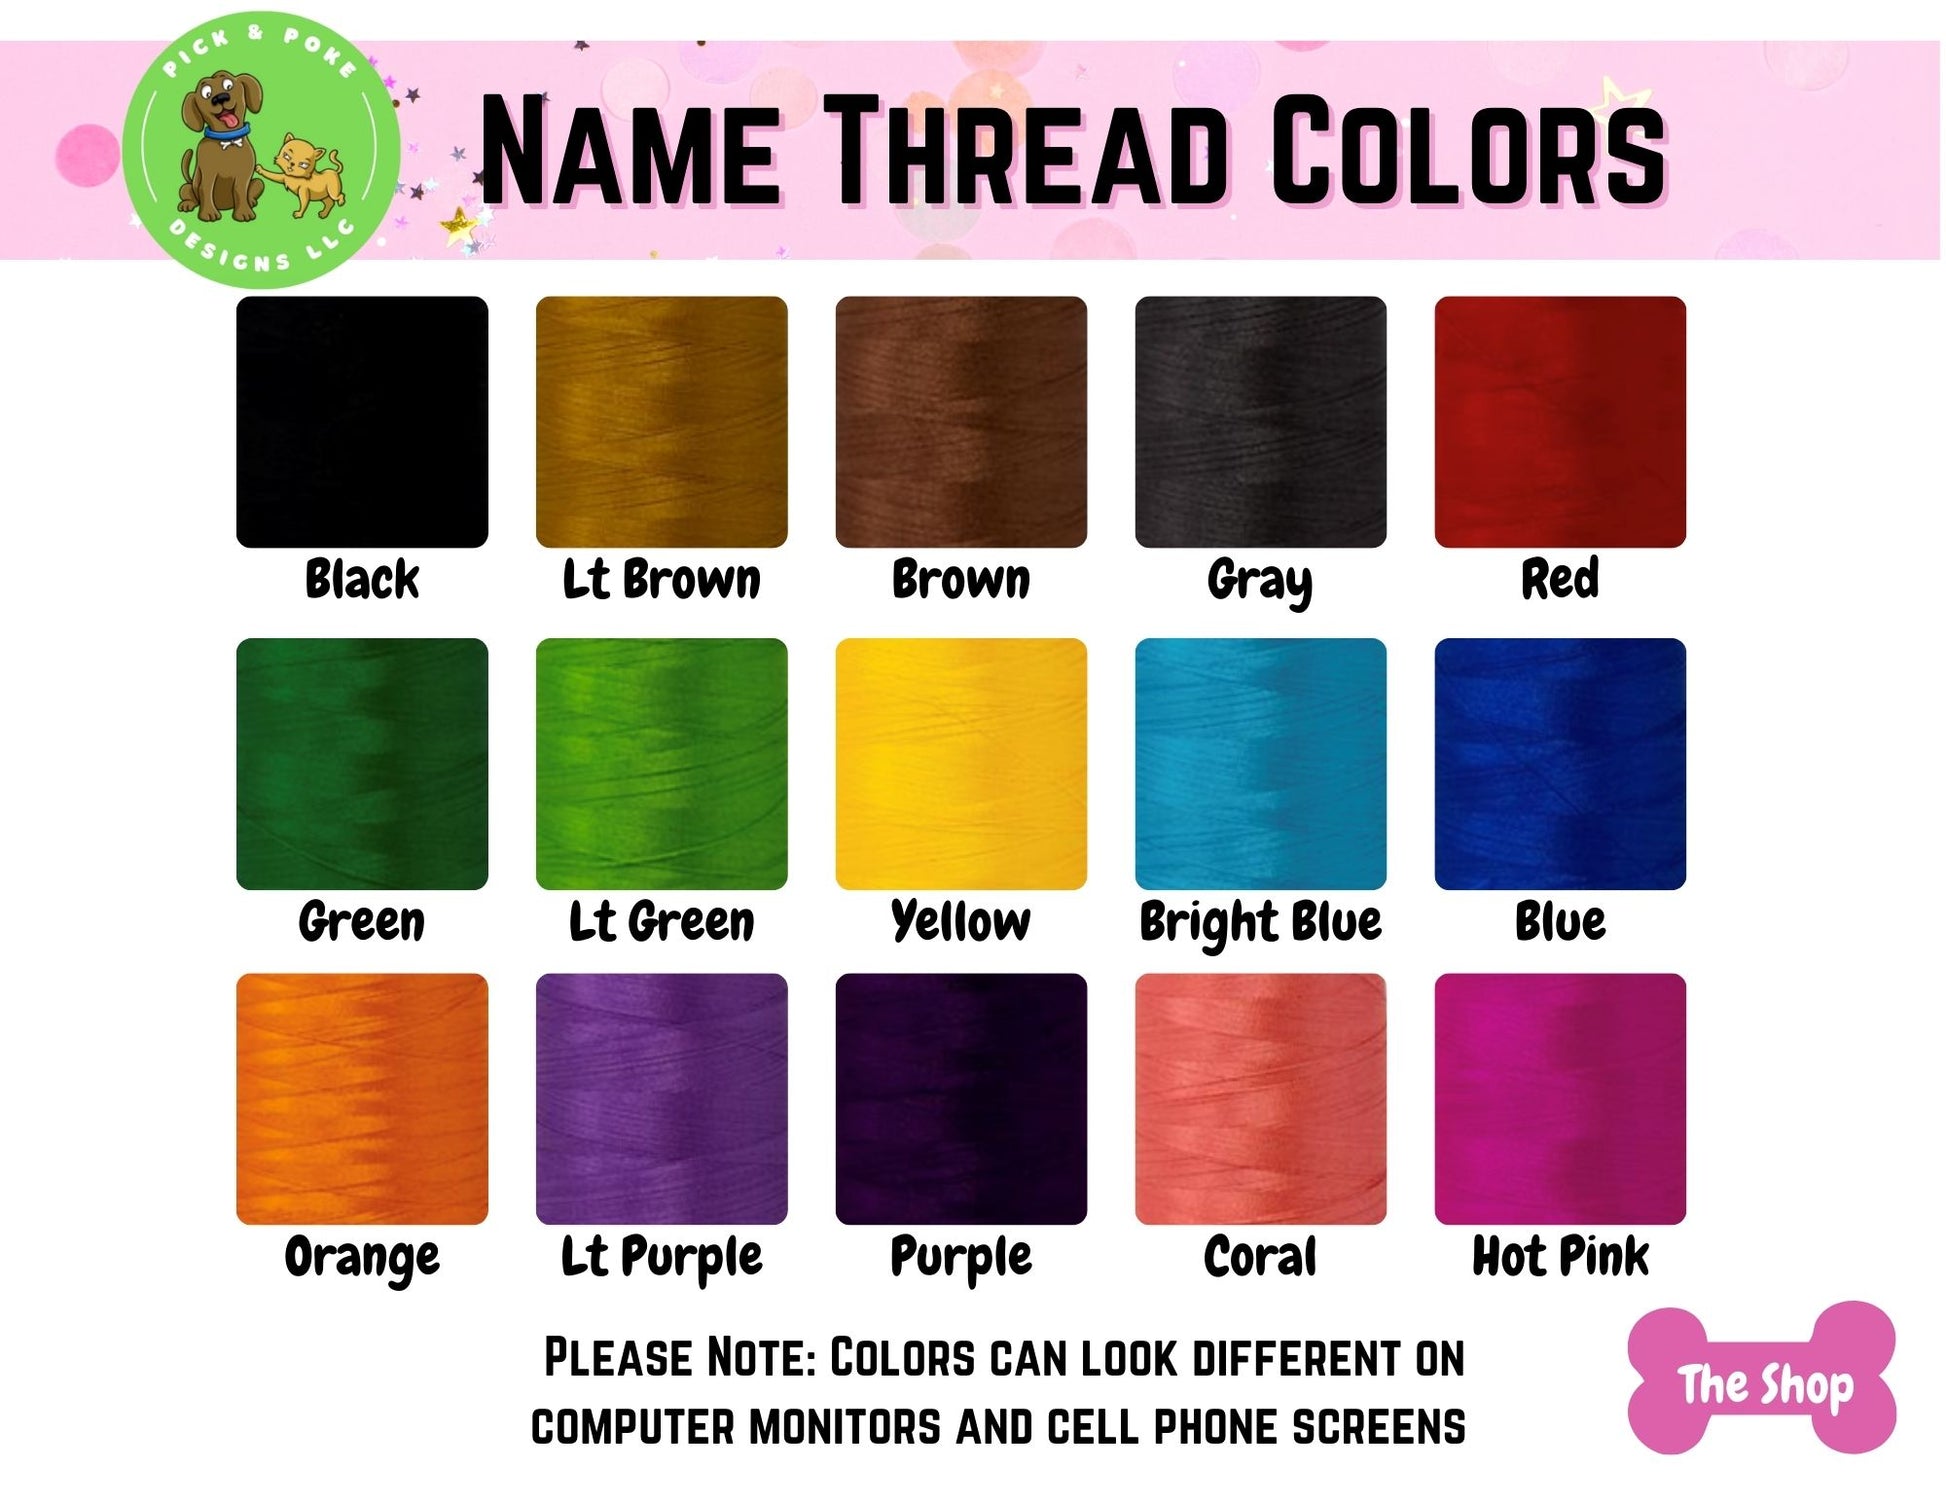 Name thread colors include black, lt brown, brown, gray, red, green, lt green, yellow, bright blue, blue, orange, lt purple, purple, coral, and hot pink